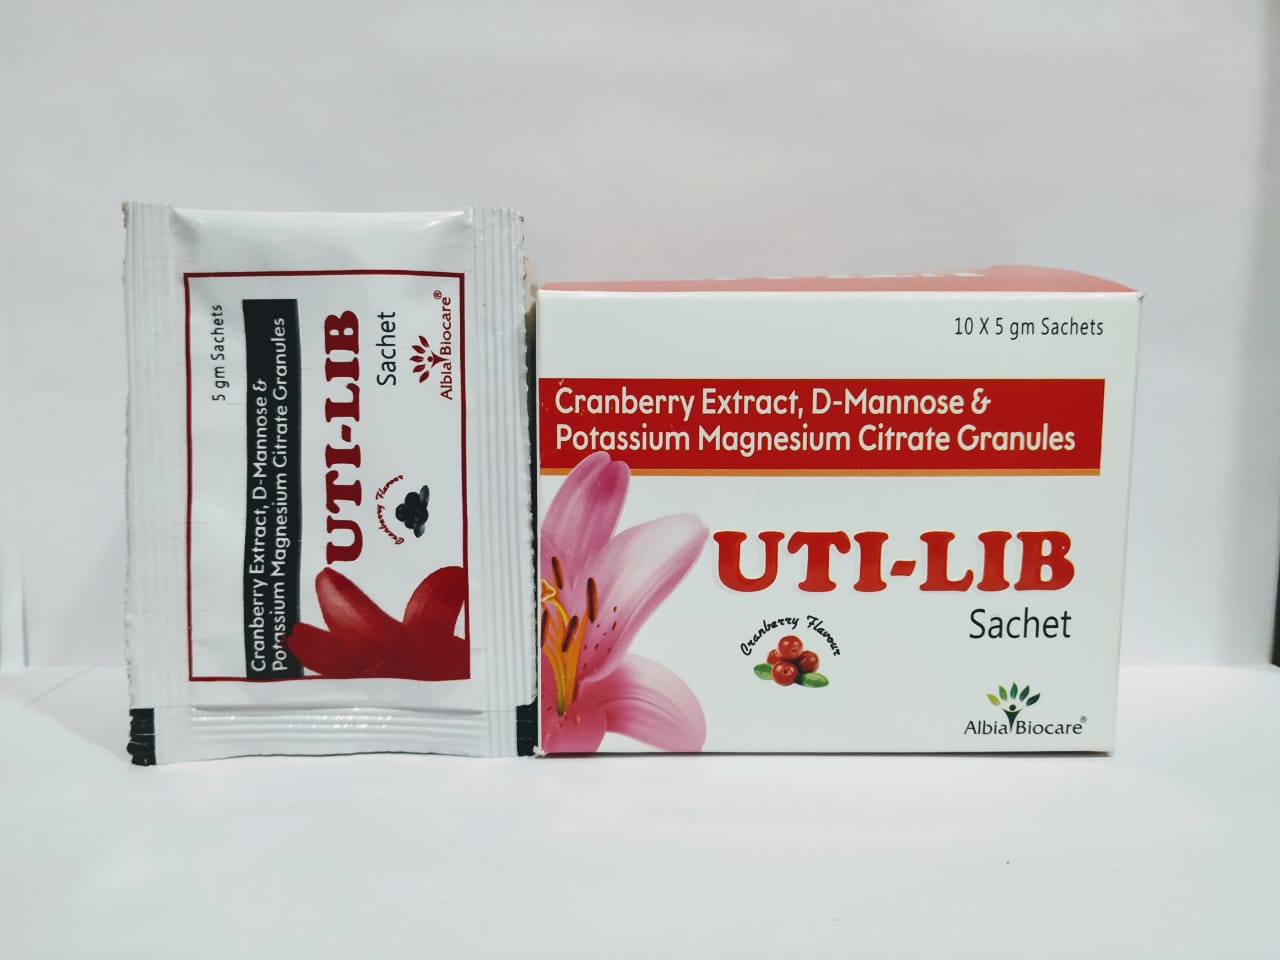 UTI-LIB Sachet | Cranberry Extract 200 mg + D-Mannose 300 mg + Potassium Magnesium Citrate 978 mg (Granules with Cranberry Flavour)